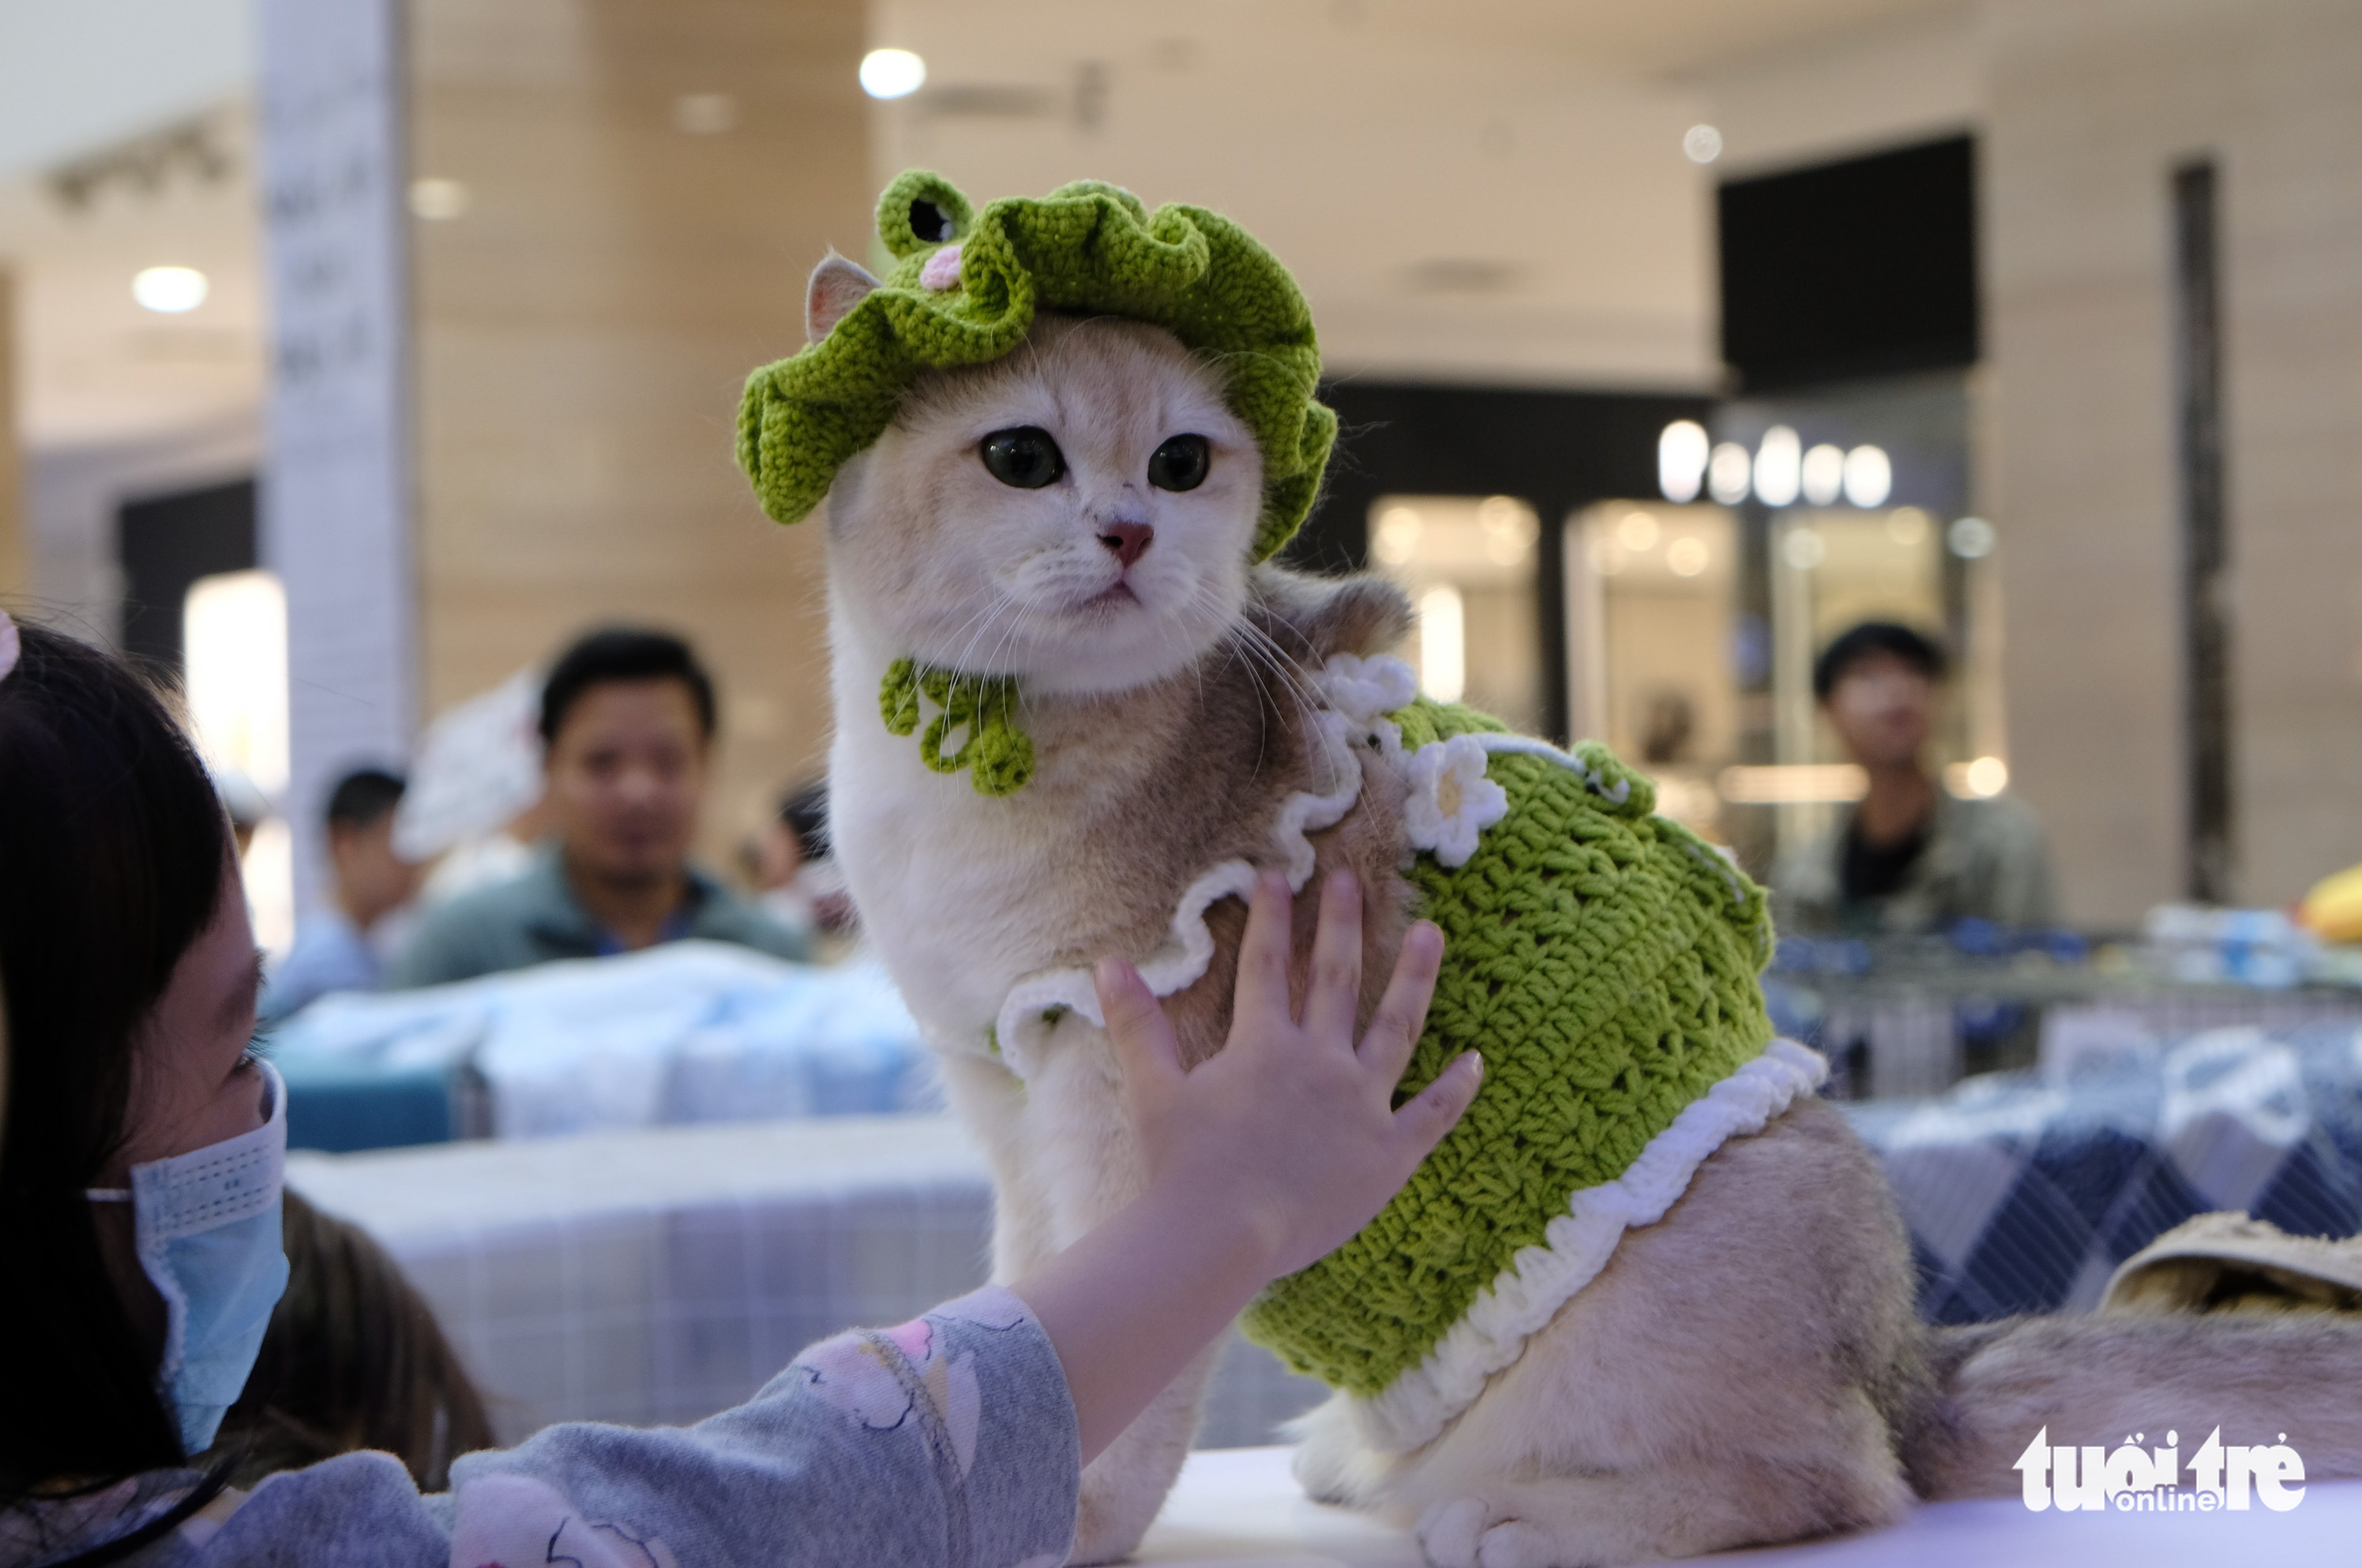 Over 100 cats compete at Hanoi beauty pageant